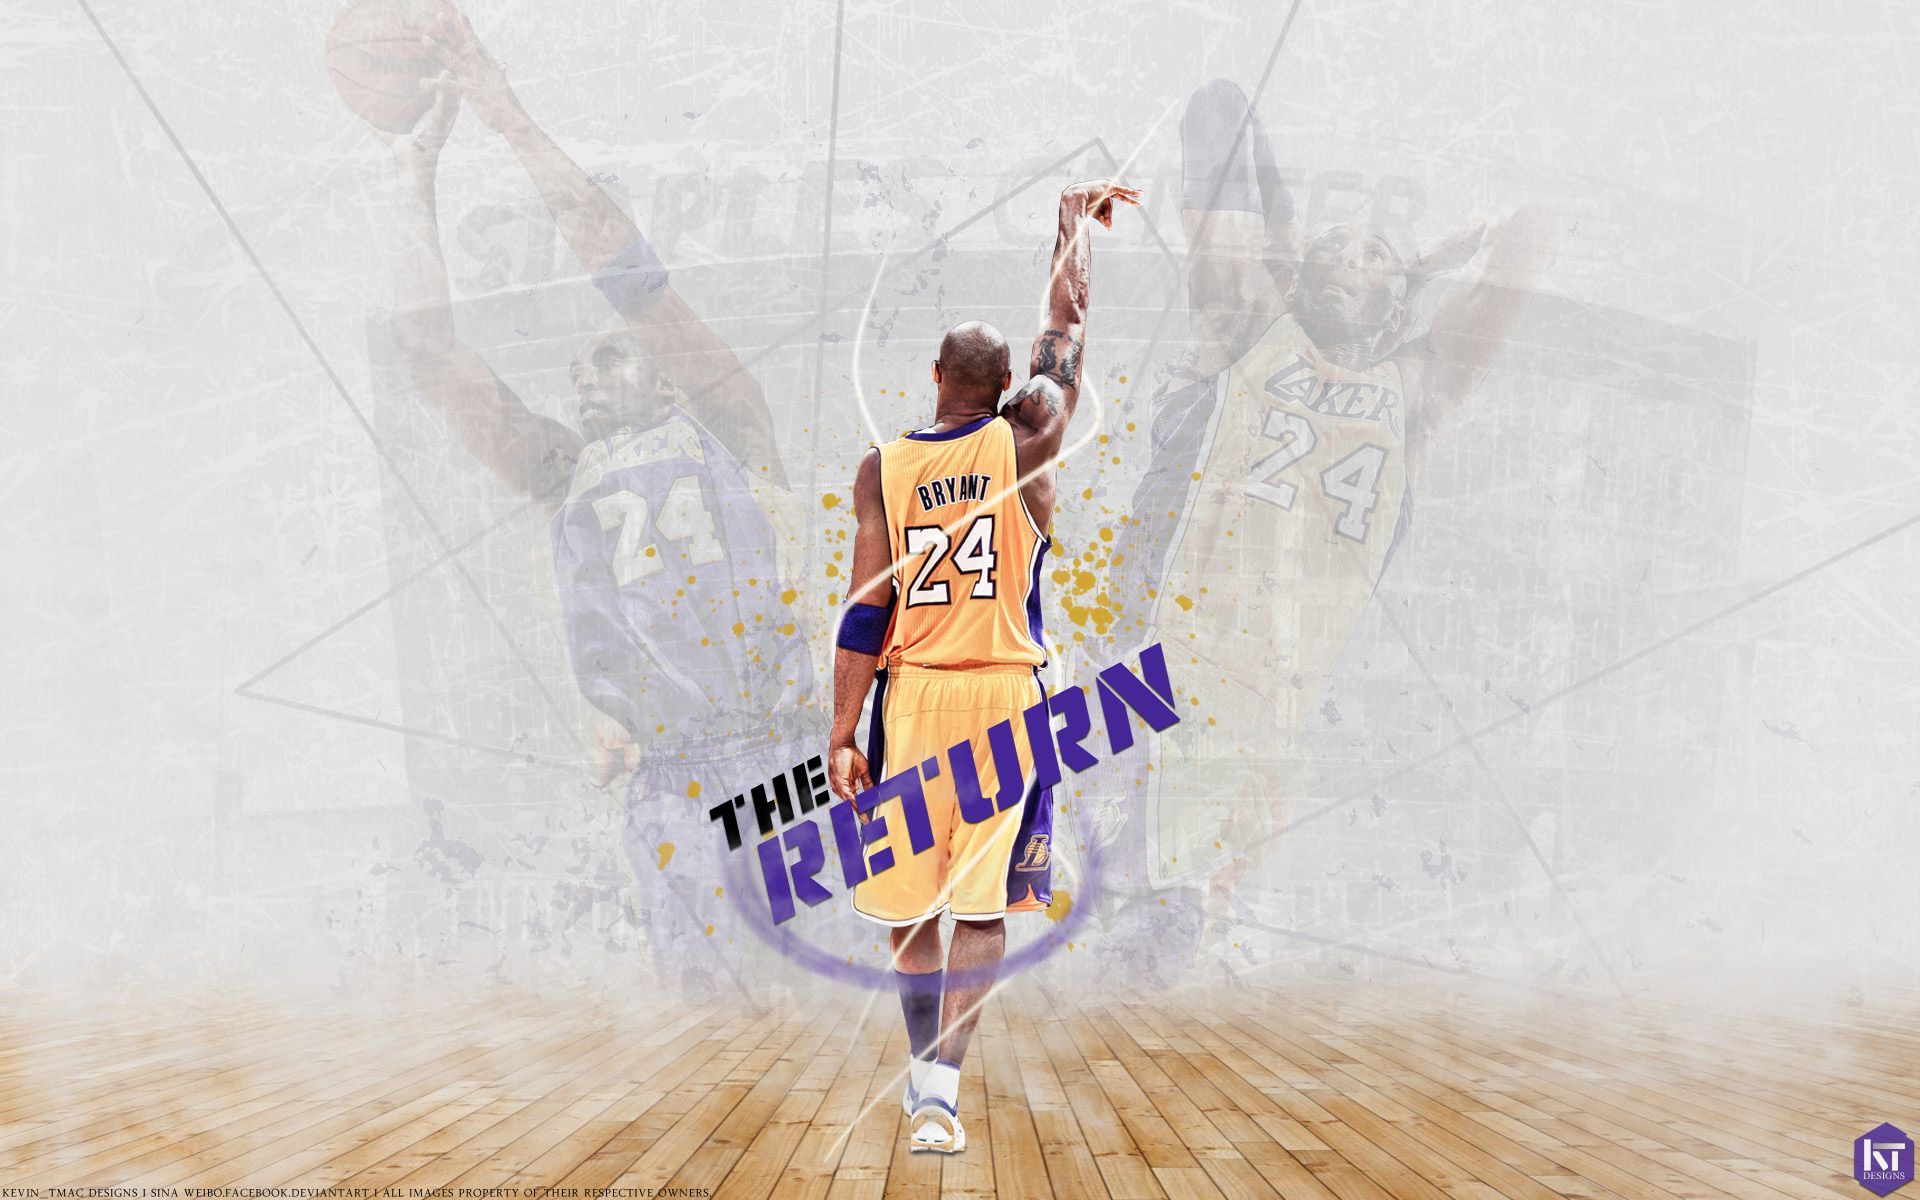 Kobe Bryant Wallpapers HD | Wallpapers, Backgrounds, Images, Art ...